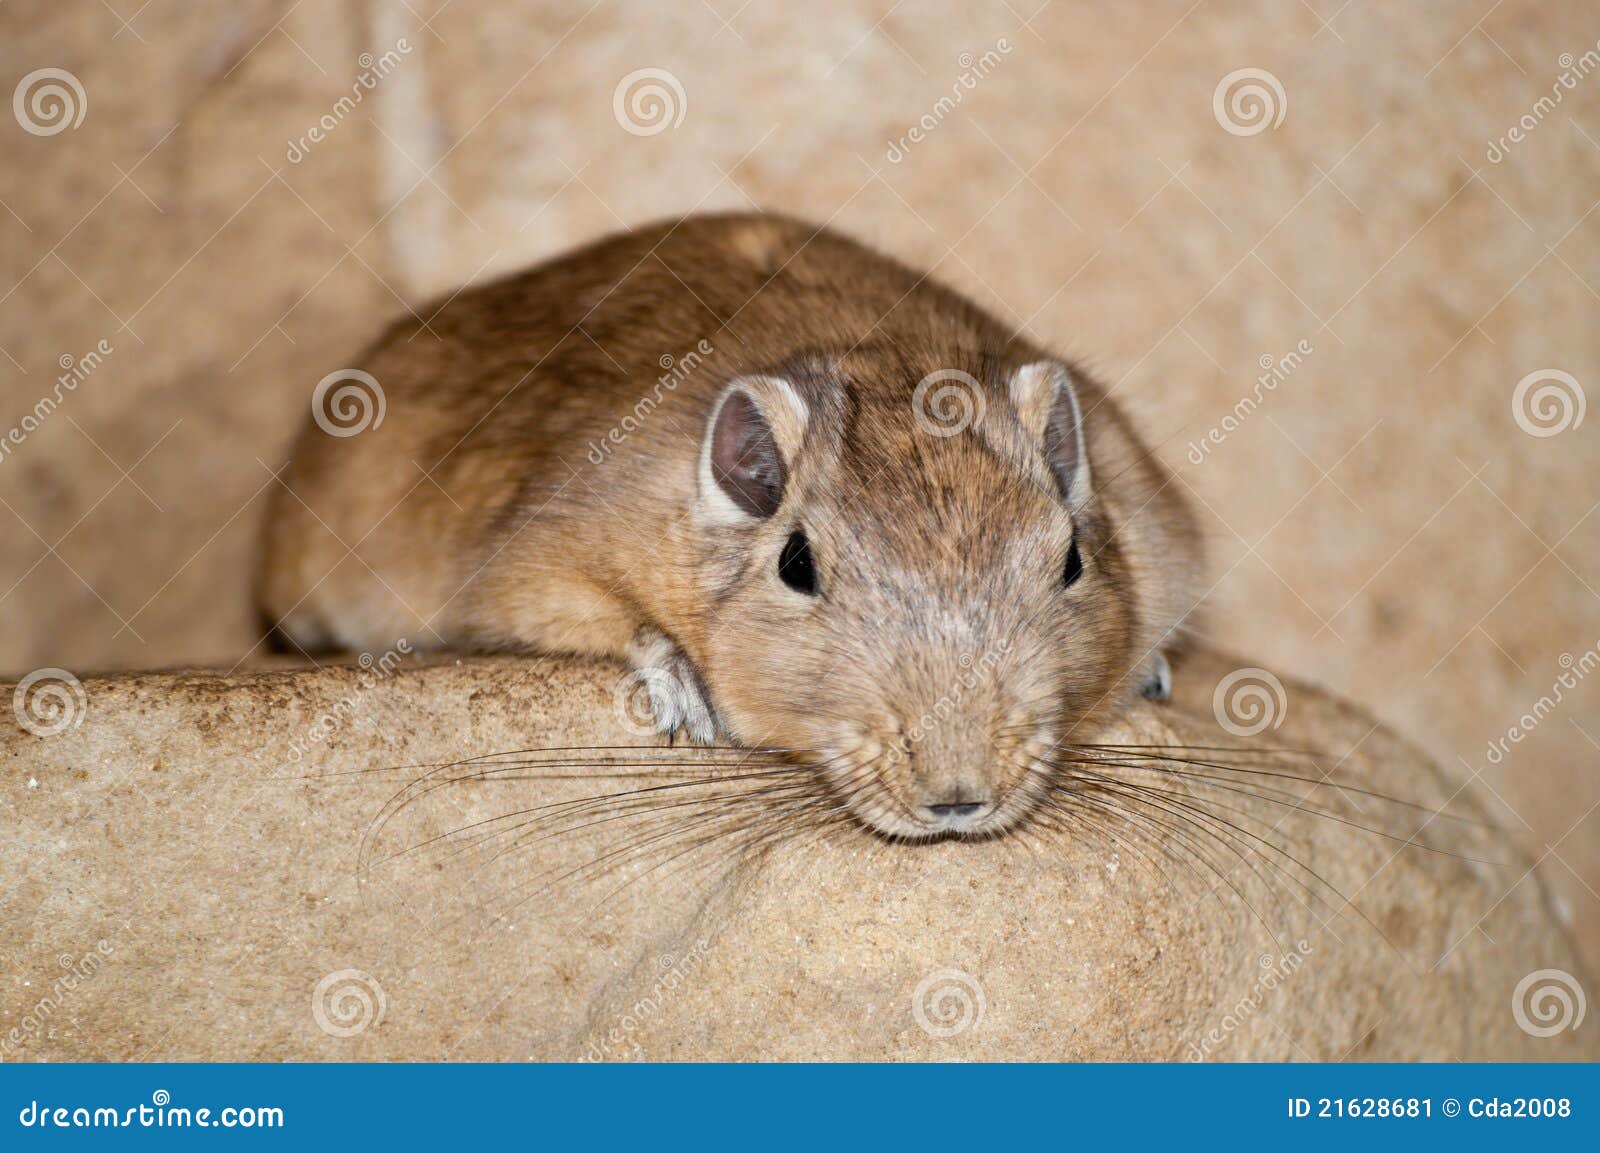 rodent on a rock